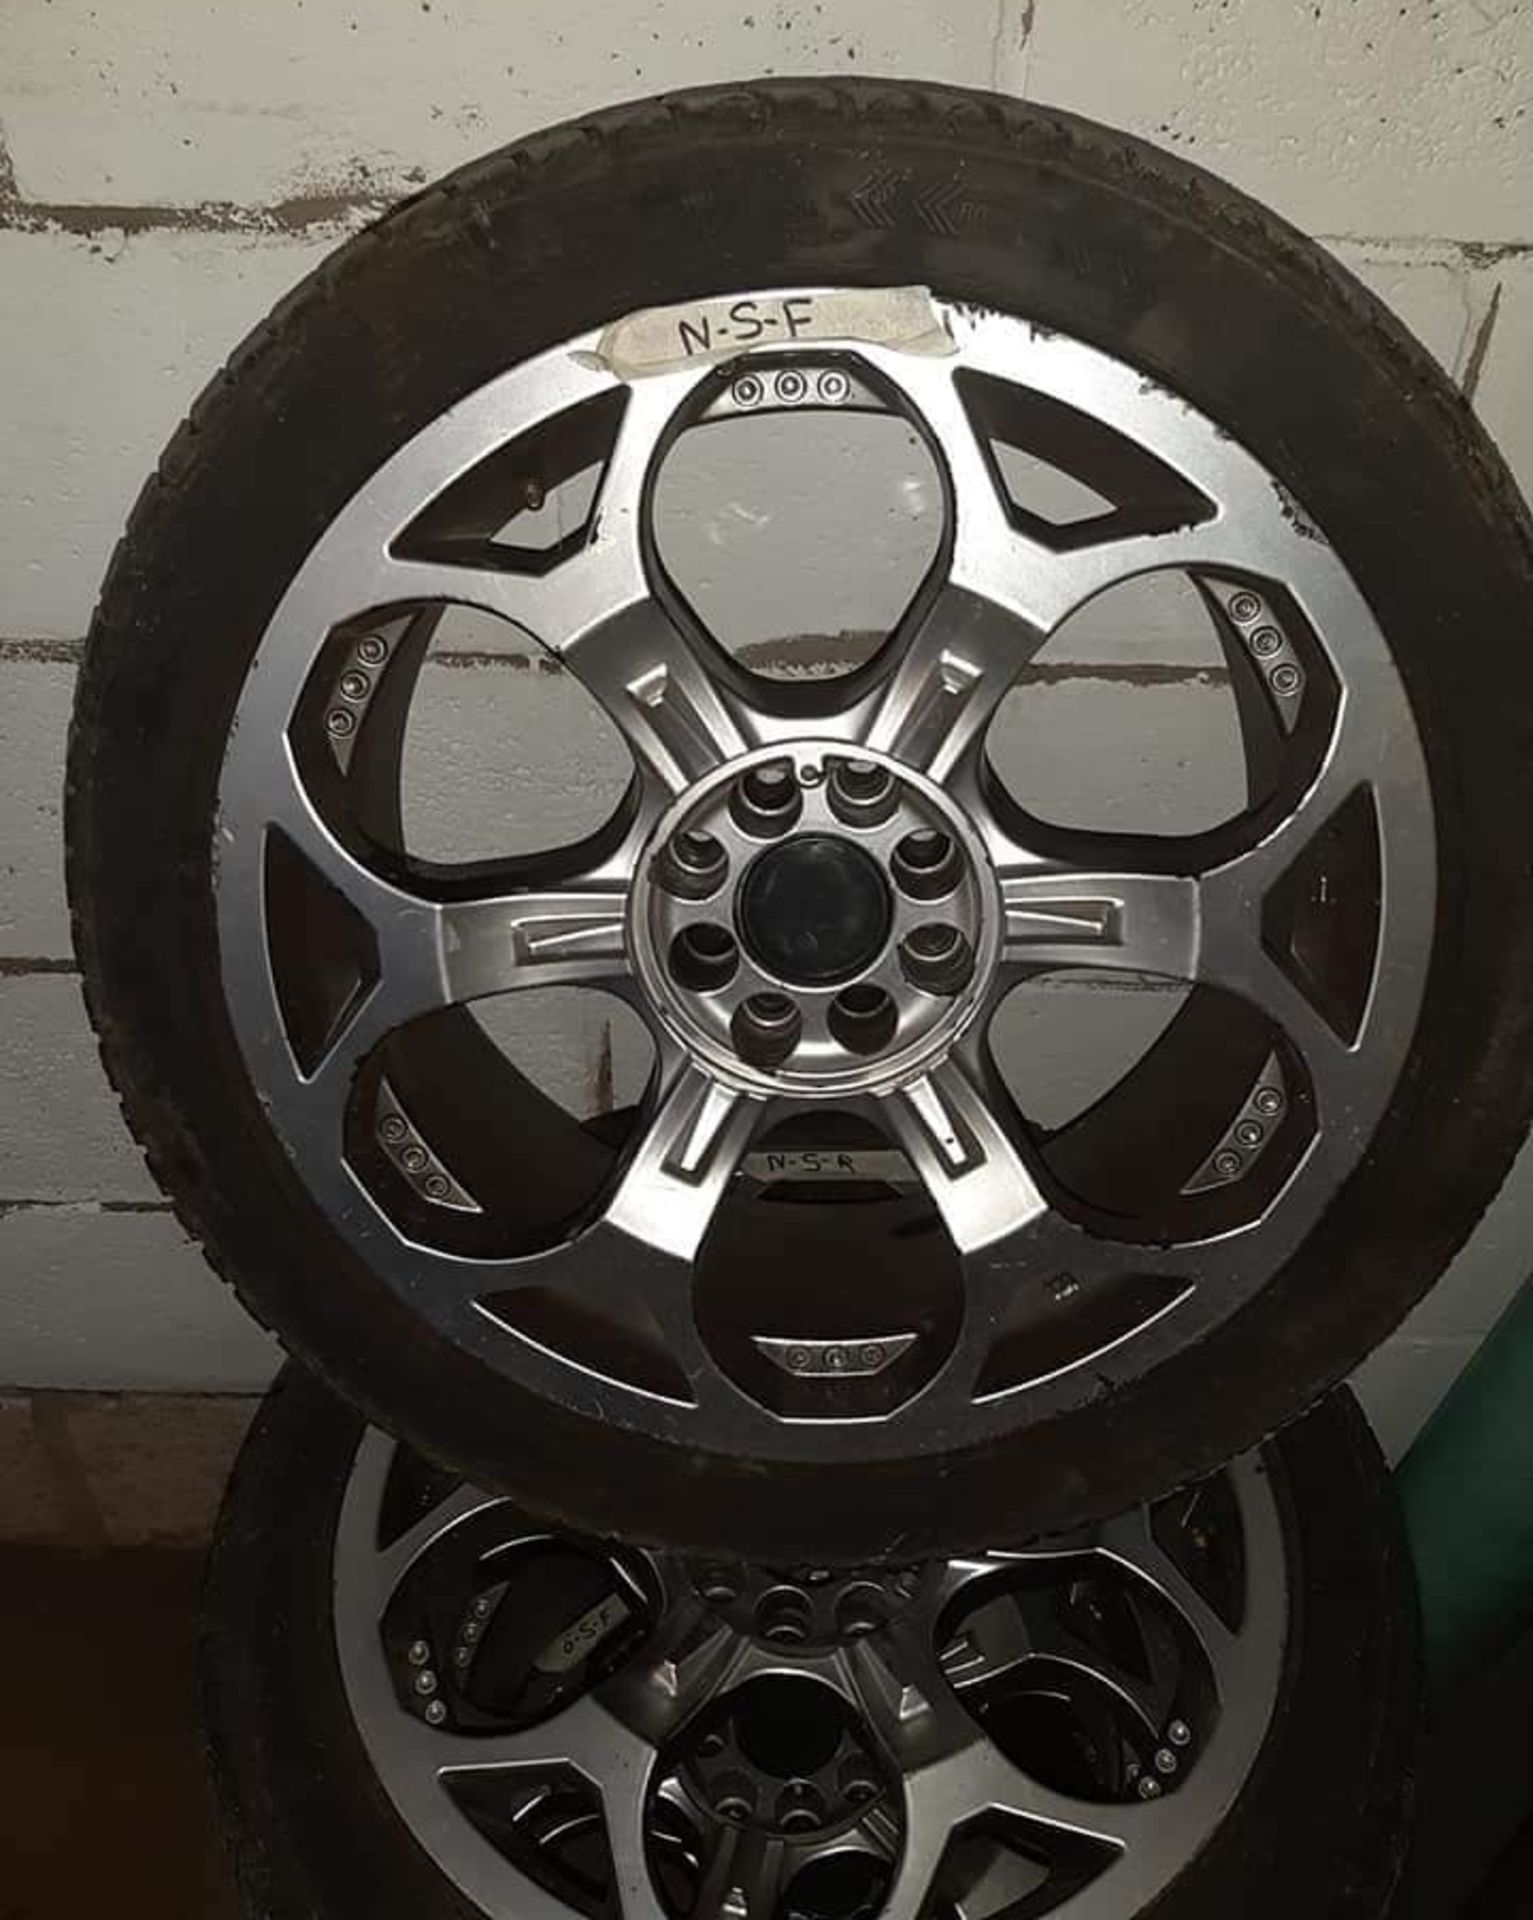 Set of 4 Multi Fitment 4 Stud 17" x 7.0" Alloy Wheels with 205/45ZR17 Tyres - CL444 - No VAT on - Image 7 of 9